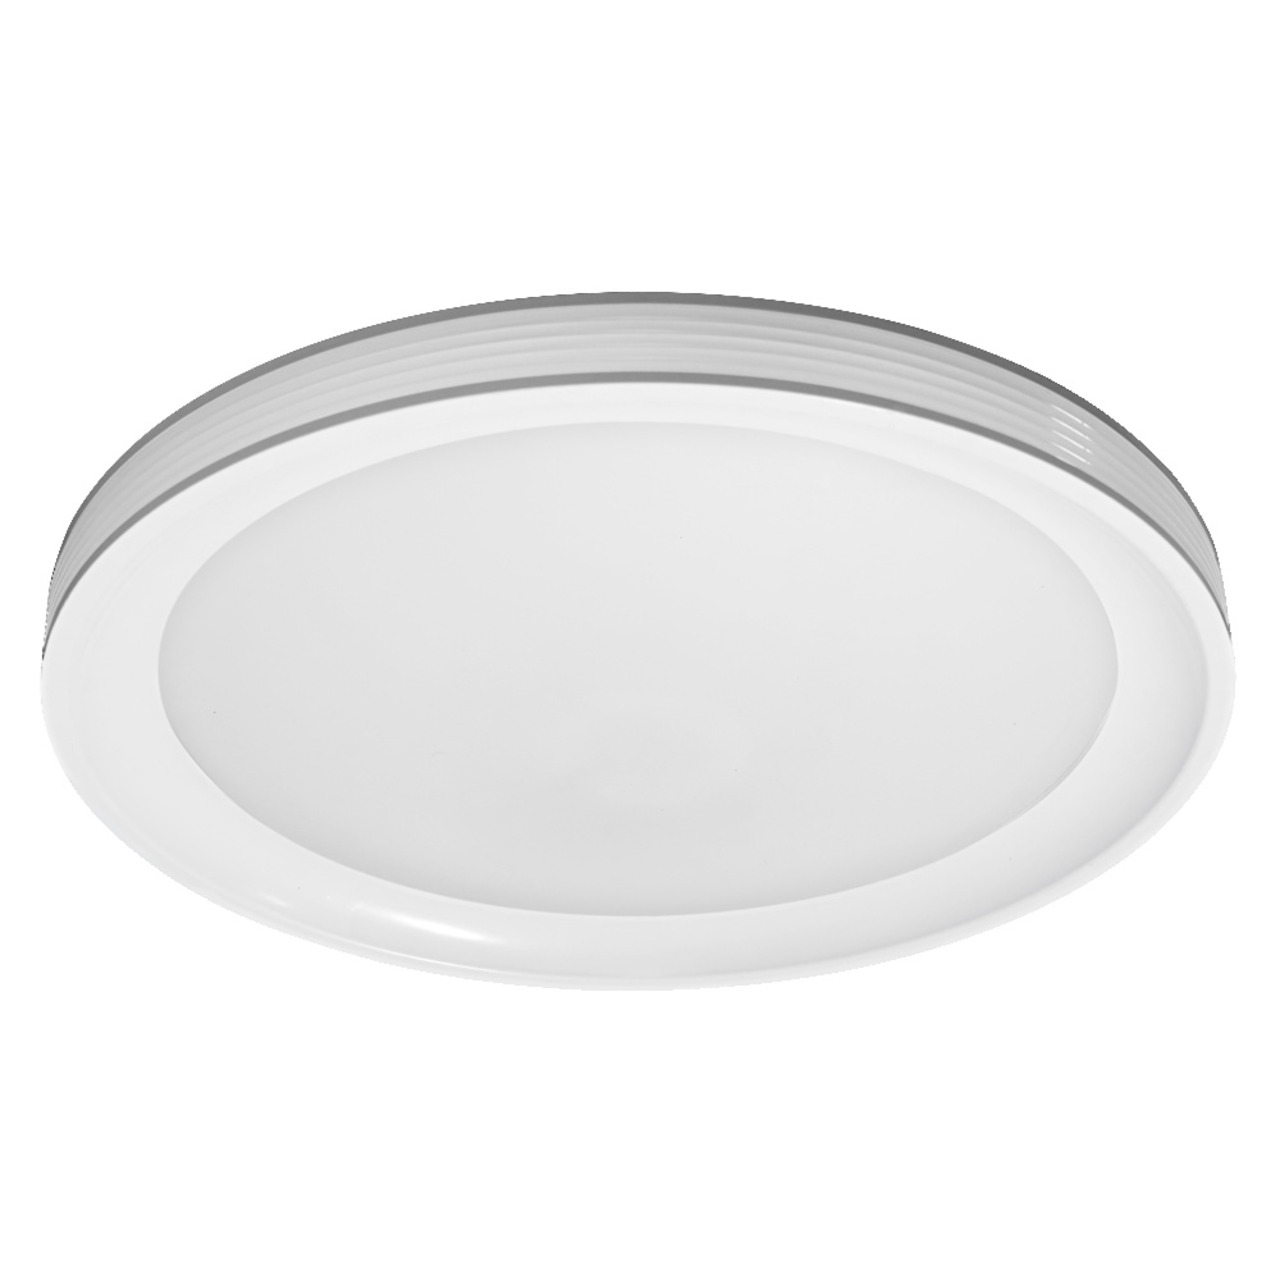 LEDVANCE SMART+ WiFi 34-W-LED-Deckenleuchte ORBIS FRAME- 3200 lm- Tunable White- dimmbar